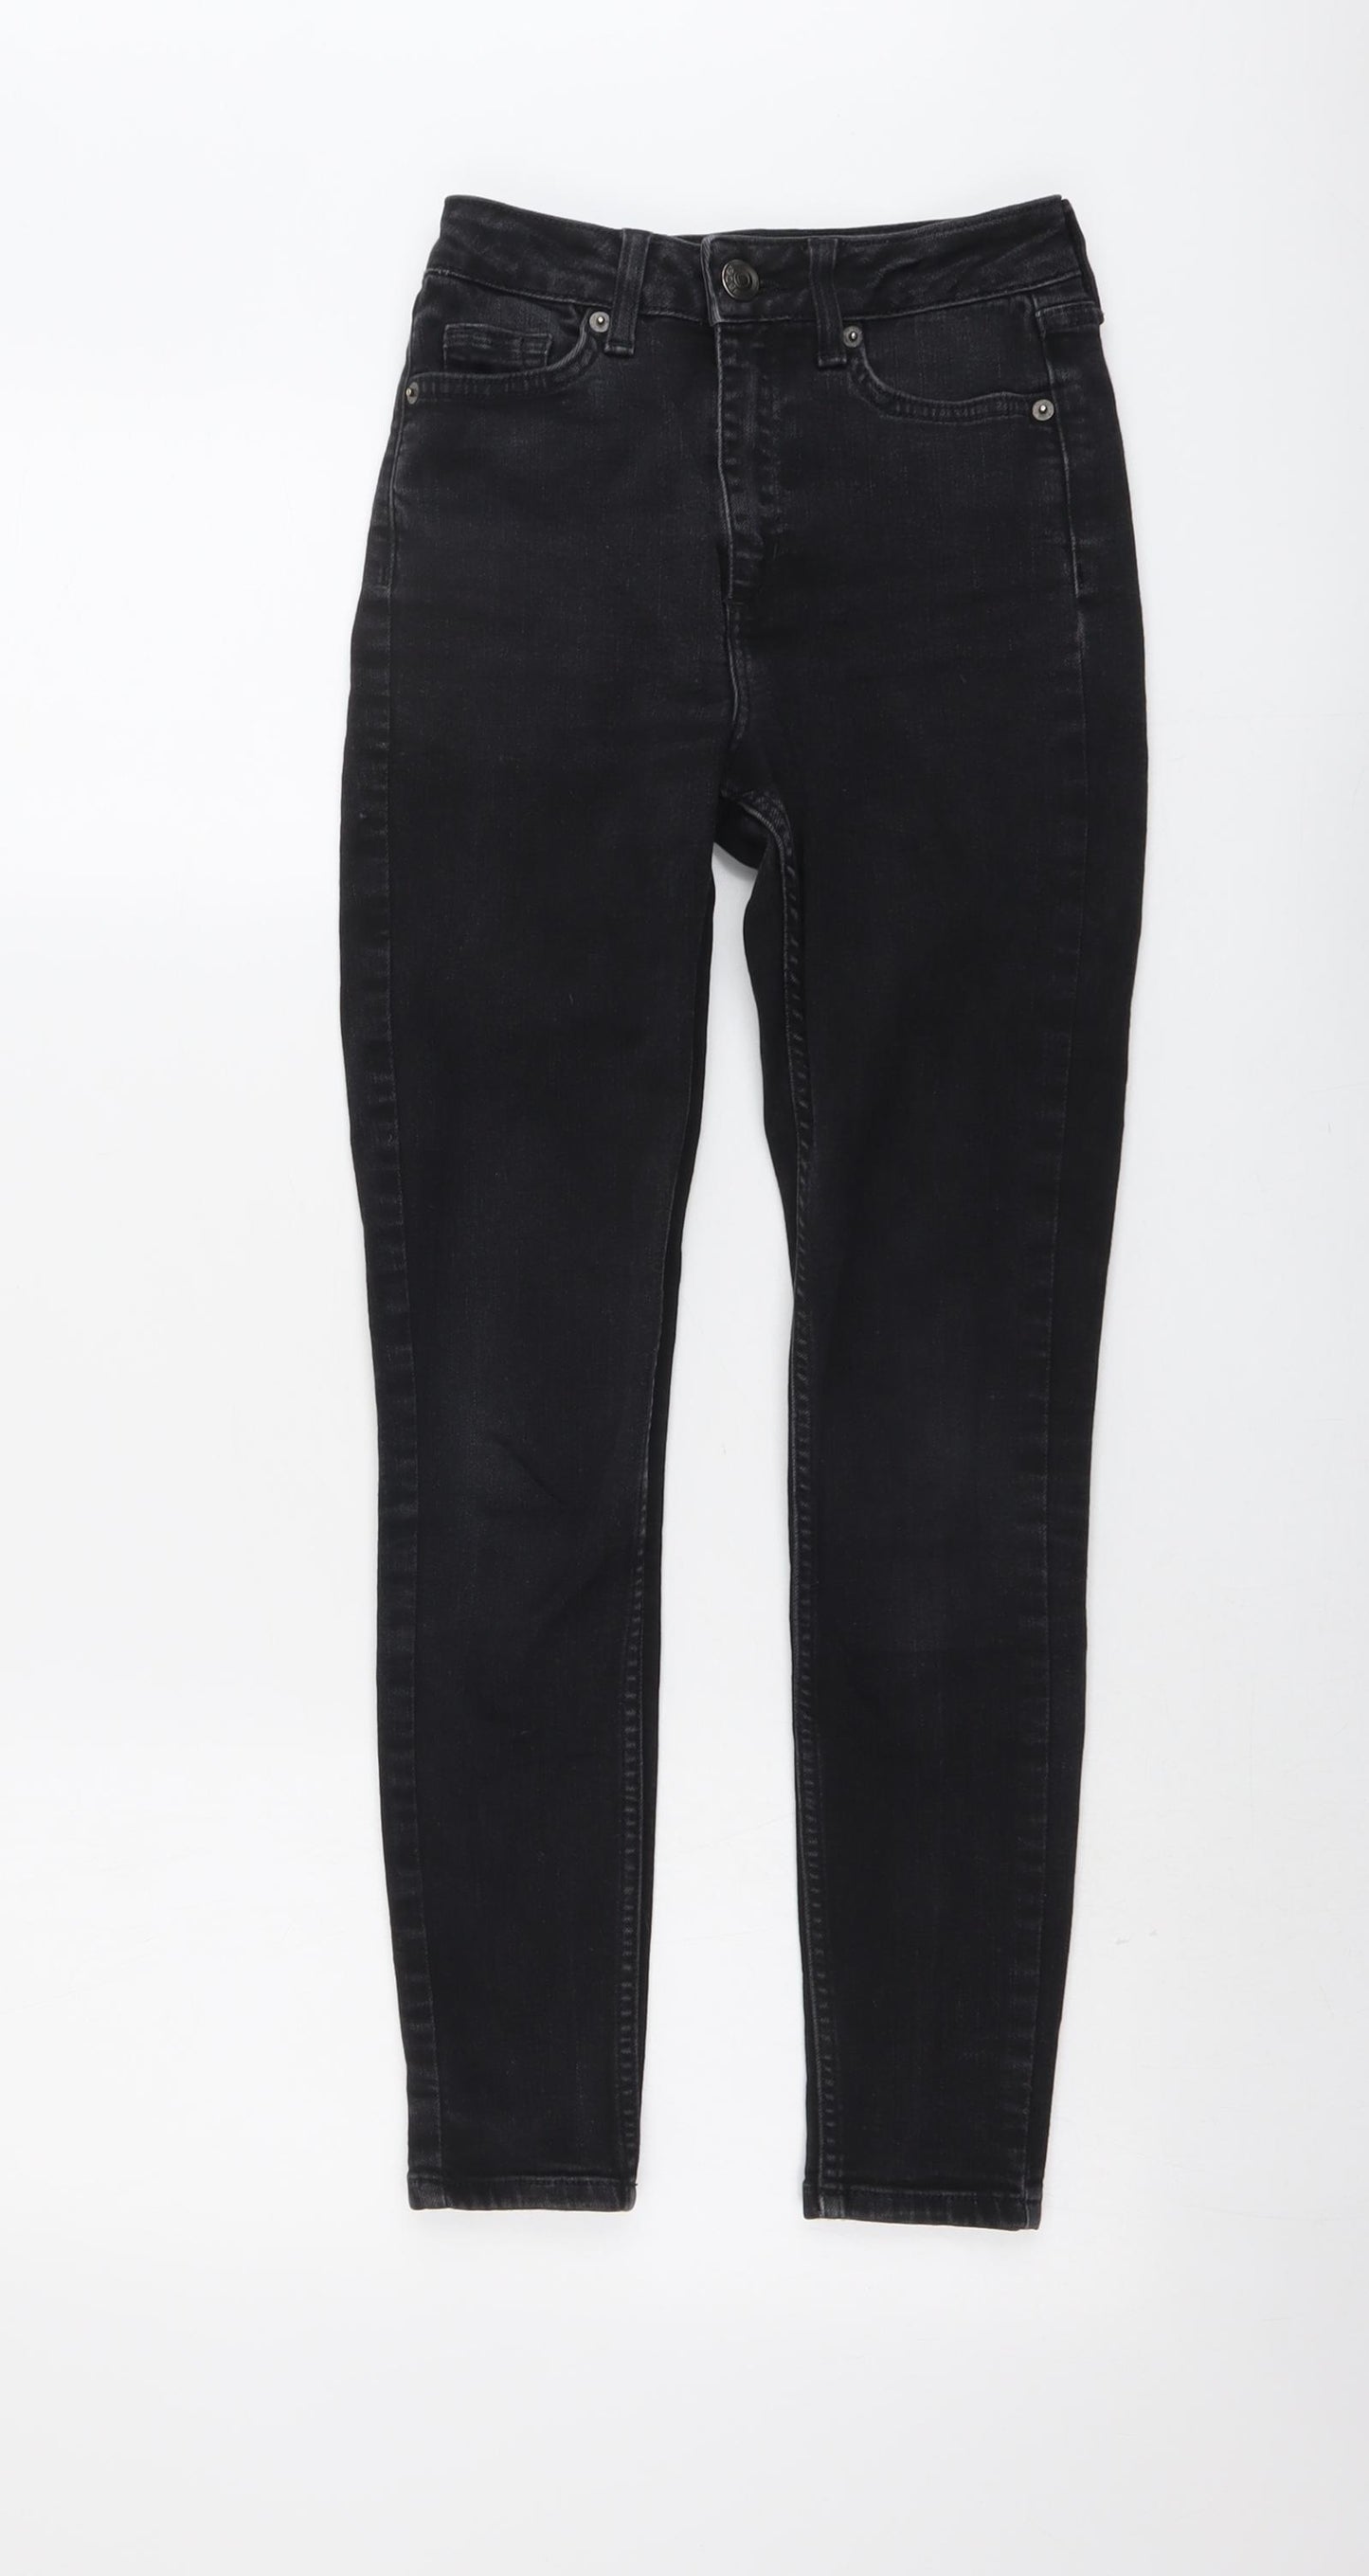 BDG Womens Black Cotton Skinny Jeans Size 24 in L26 in Regular Button